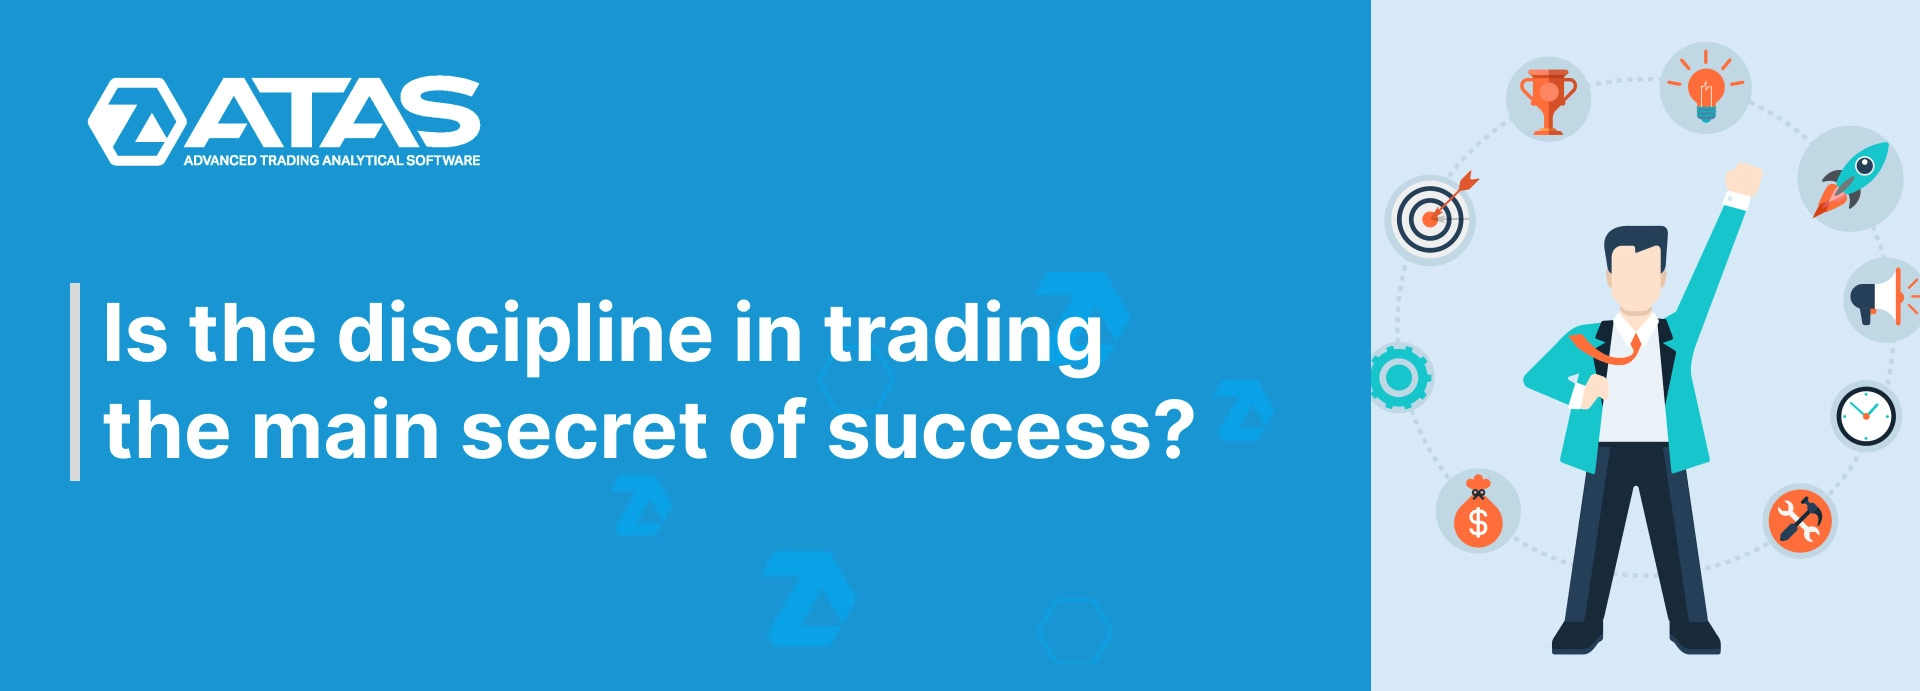 Is the discipline in trading the main secret of success